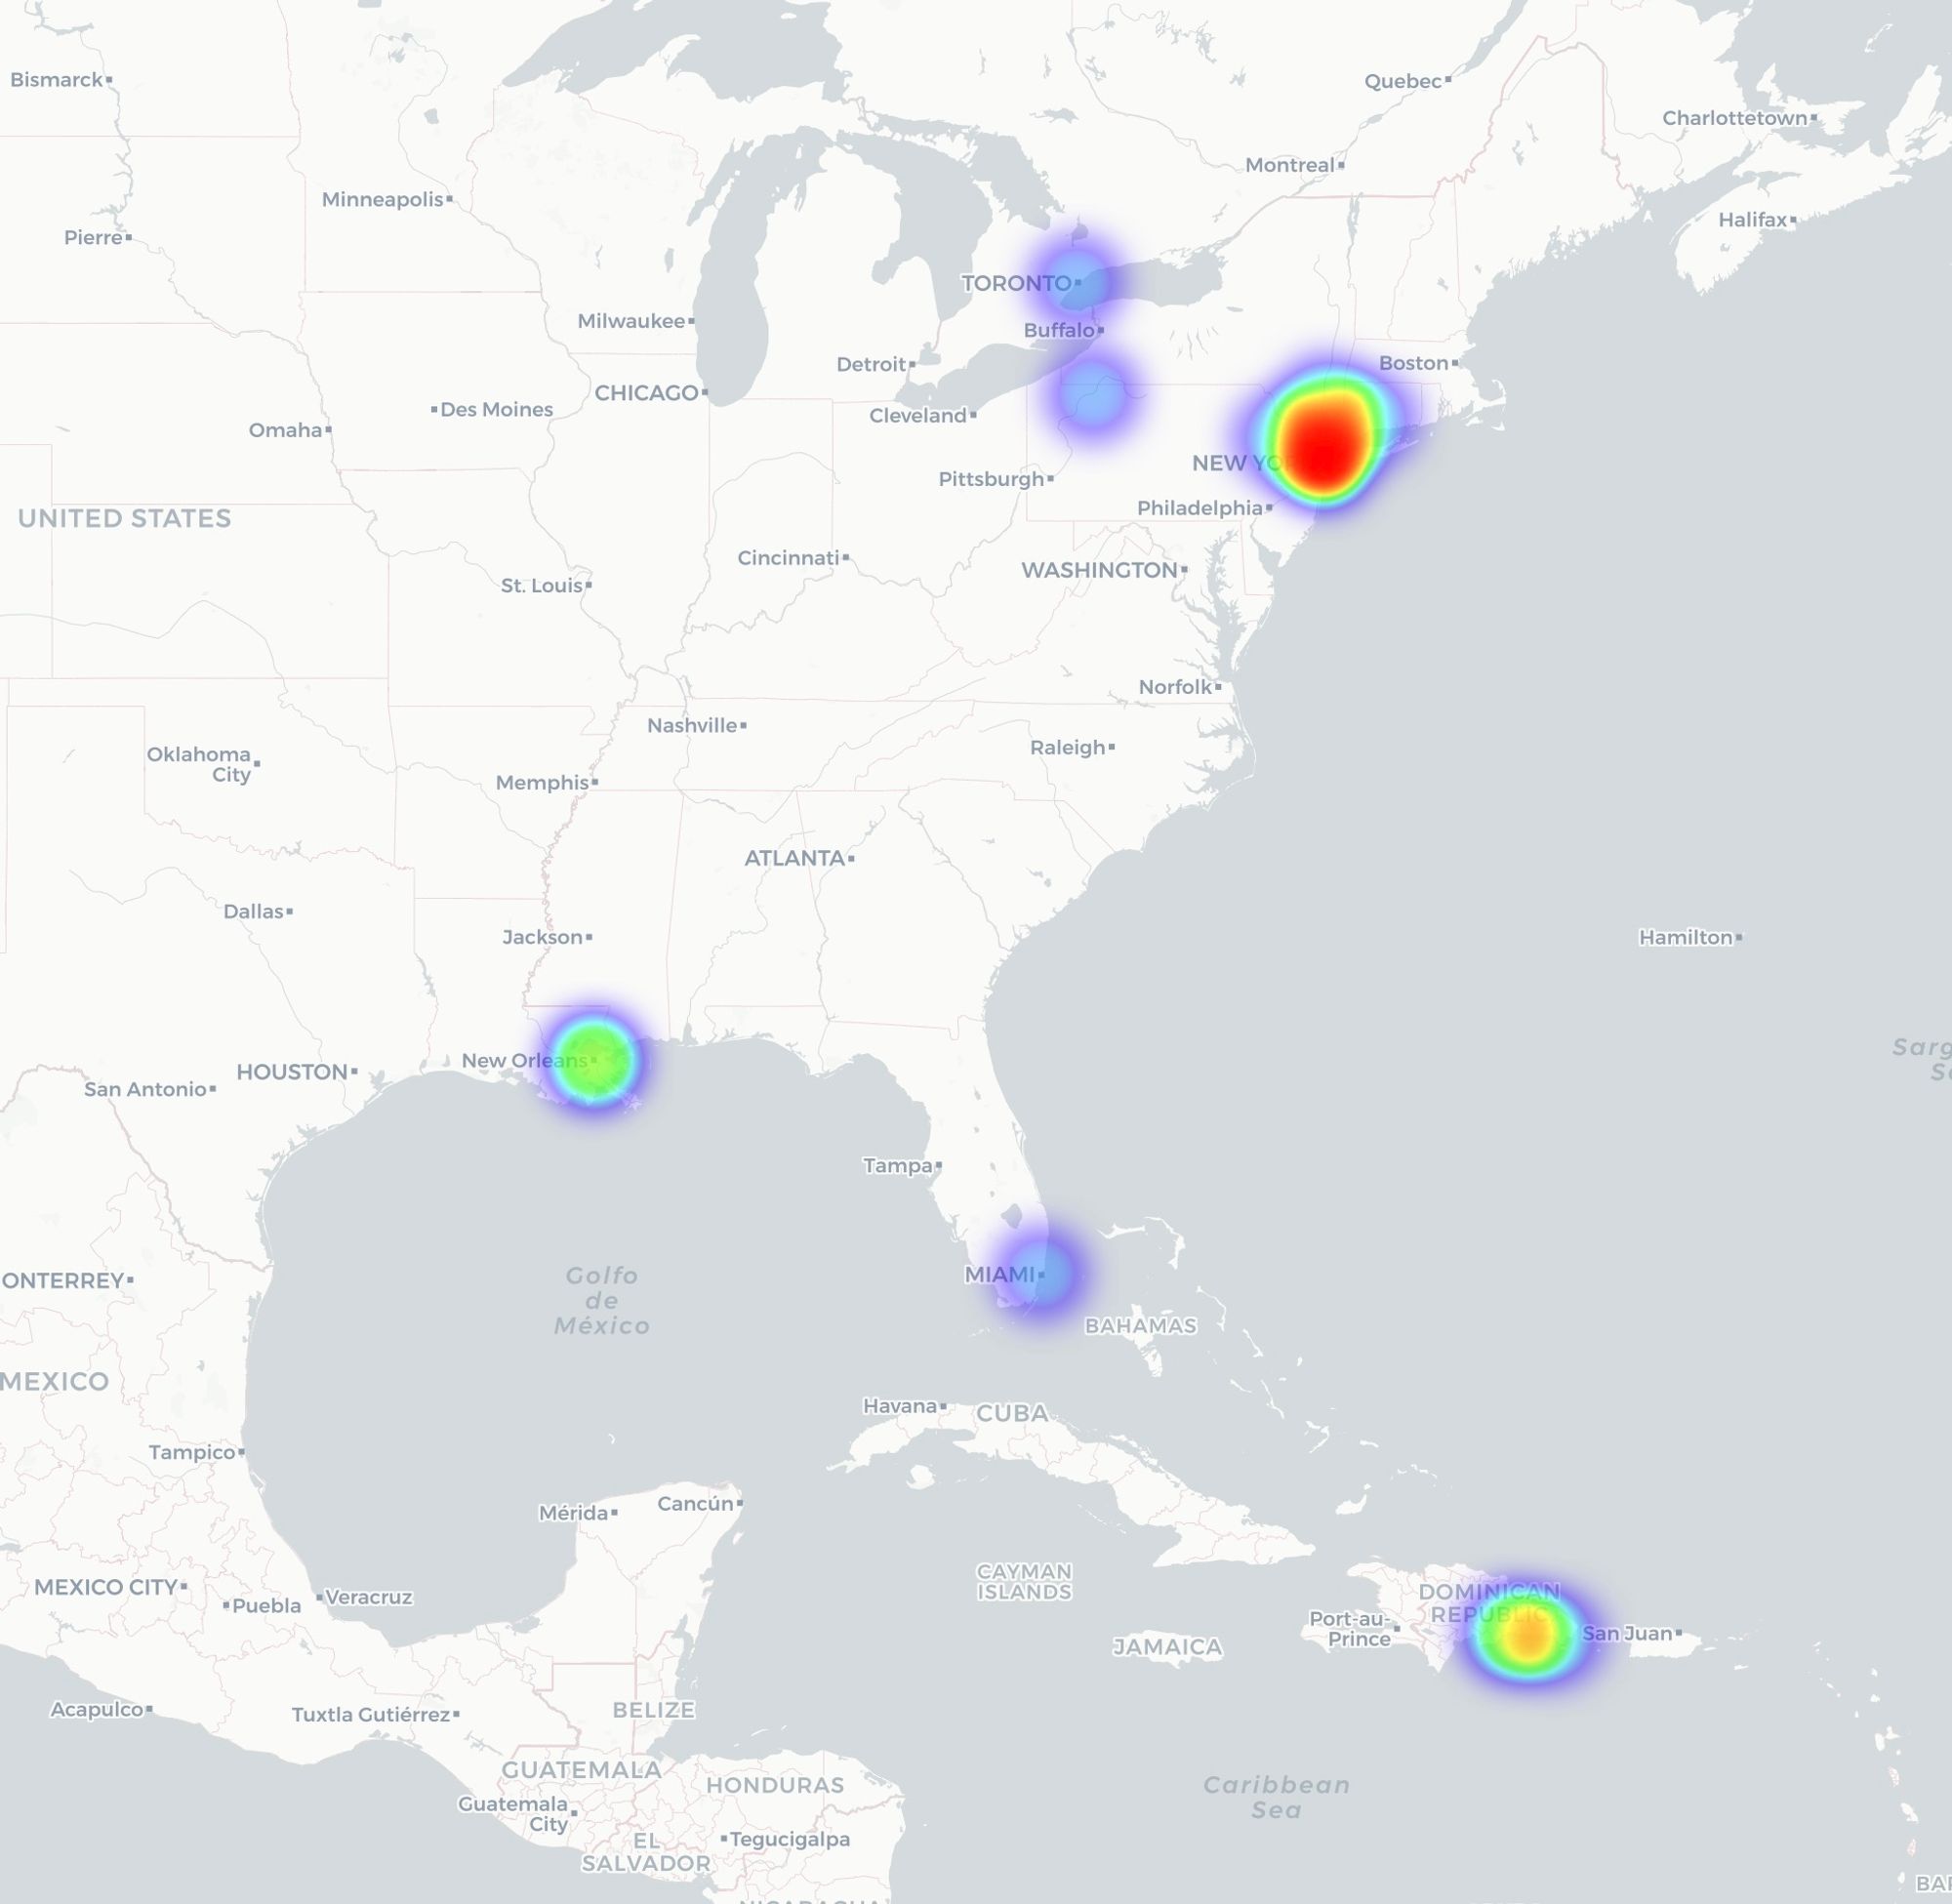 Heatmap showing the areas that I have been to. Miami, New Orleans, Dominican Republic, New York City Metro, Buffalo, Toronto.